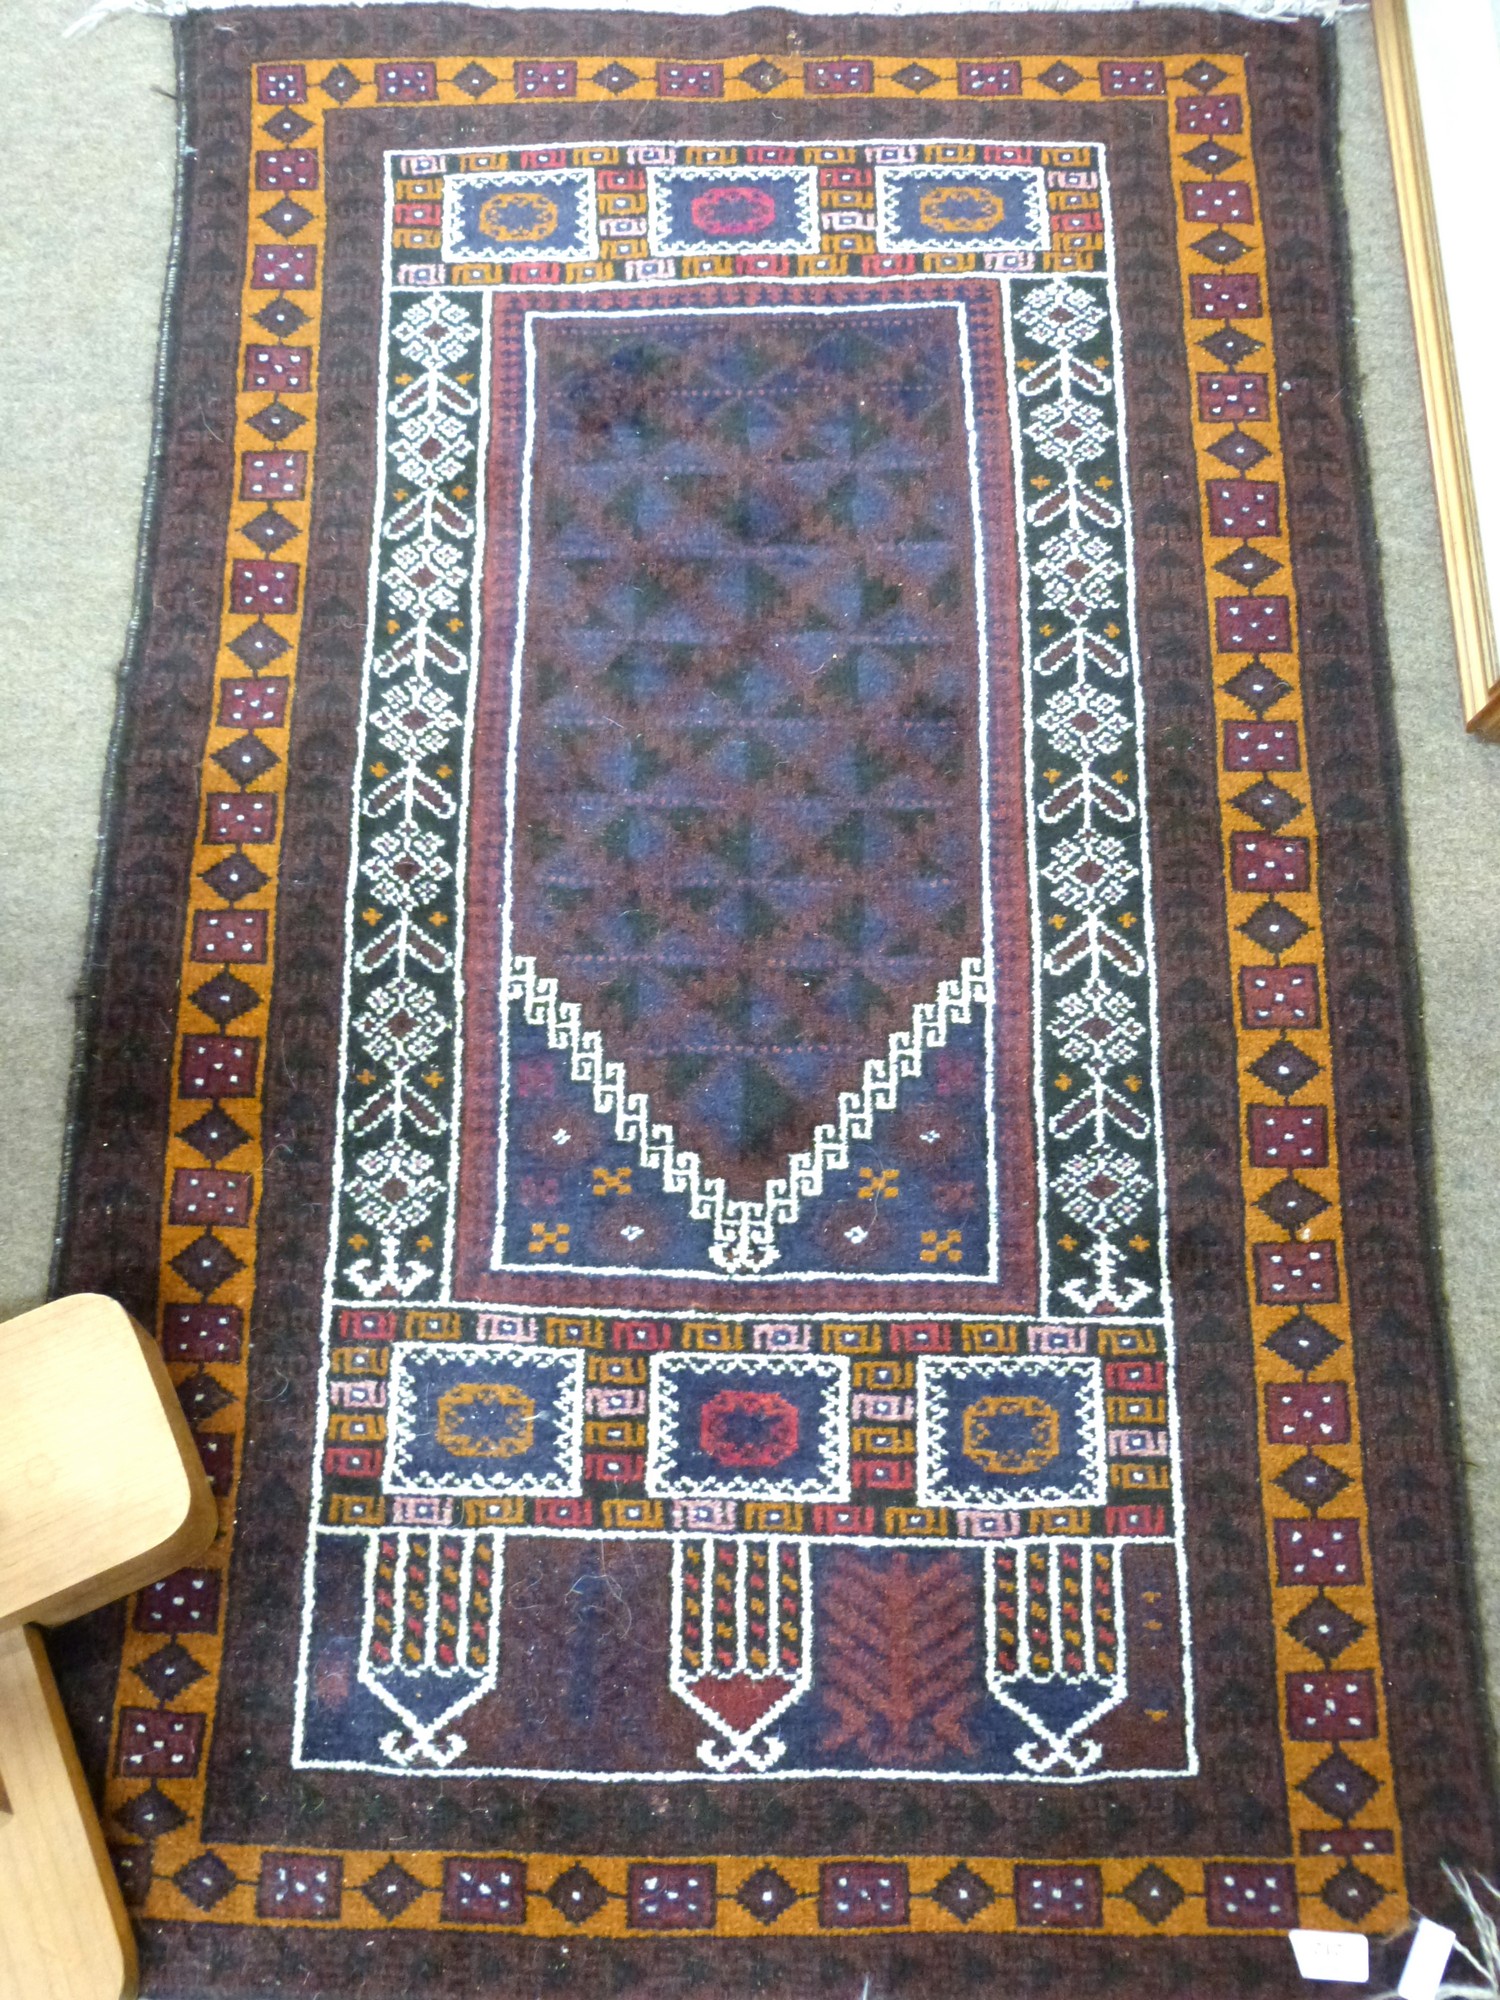 Small Iranian wool prayer rug with geometric patterns in dark blue, beige, red and orange, 130 x